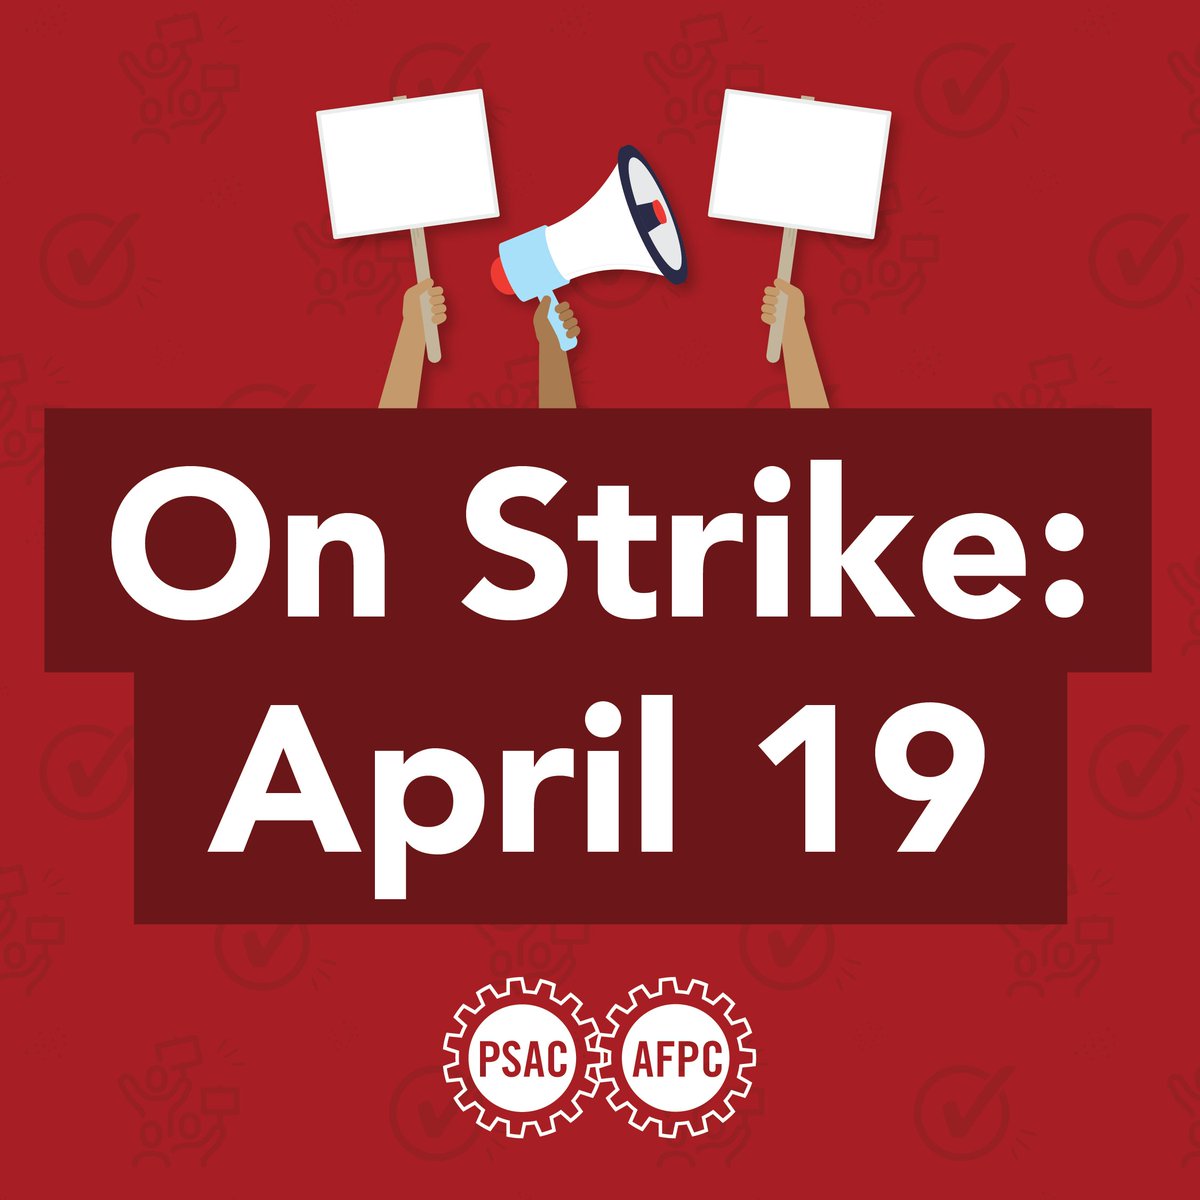 ON STRIKE 

Treasury Board and CRA members are on strike effective tomorrow at 12:01 AM ET April 19. 

Please make plans to attend your closest picket line as early as you can: workerscantwait.ca